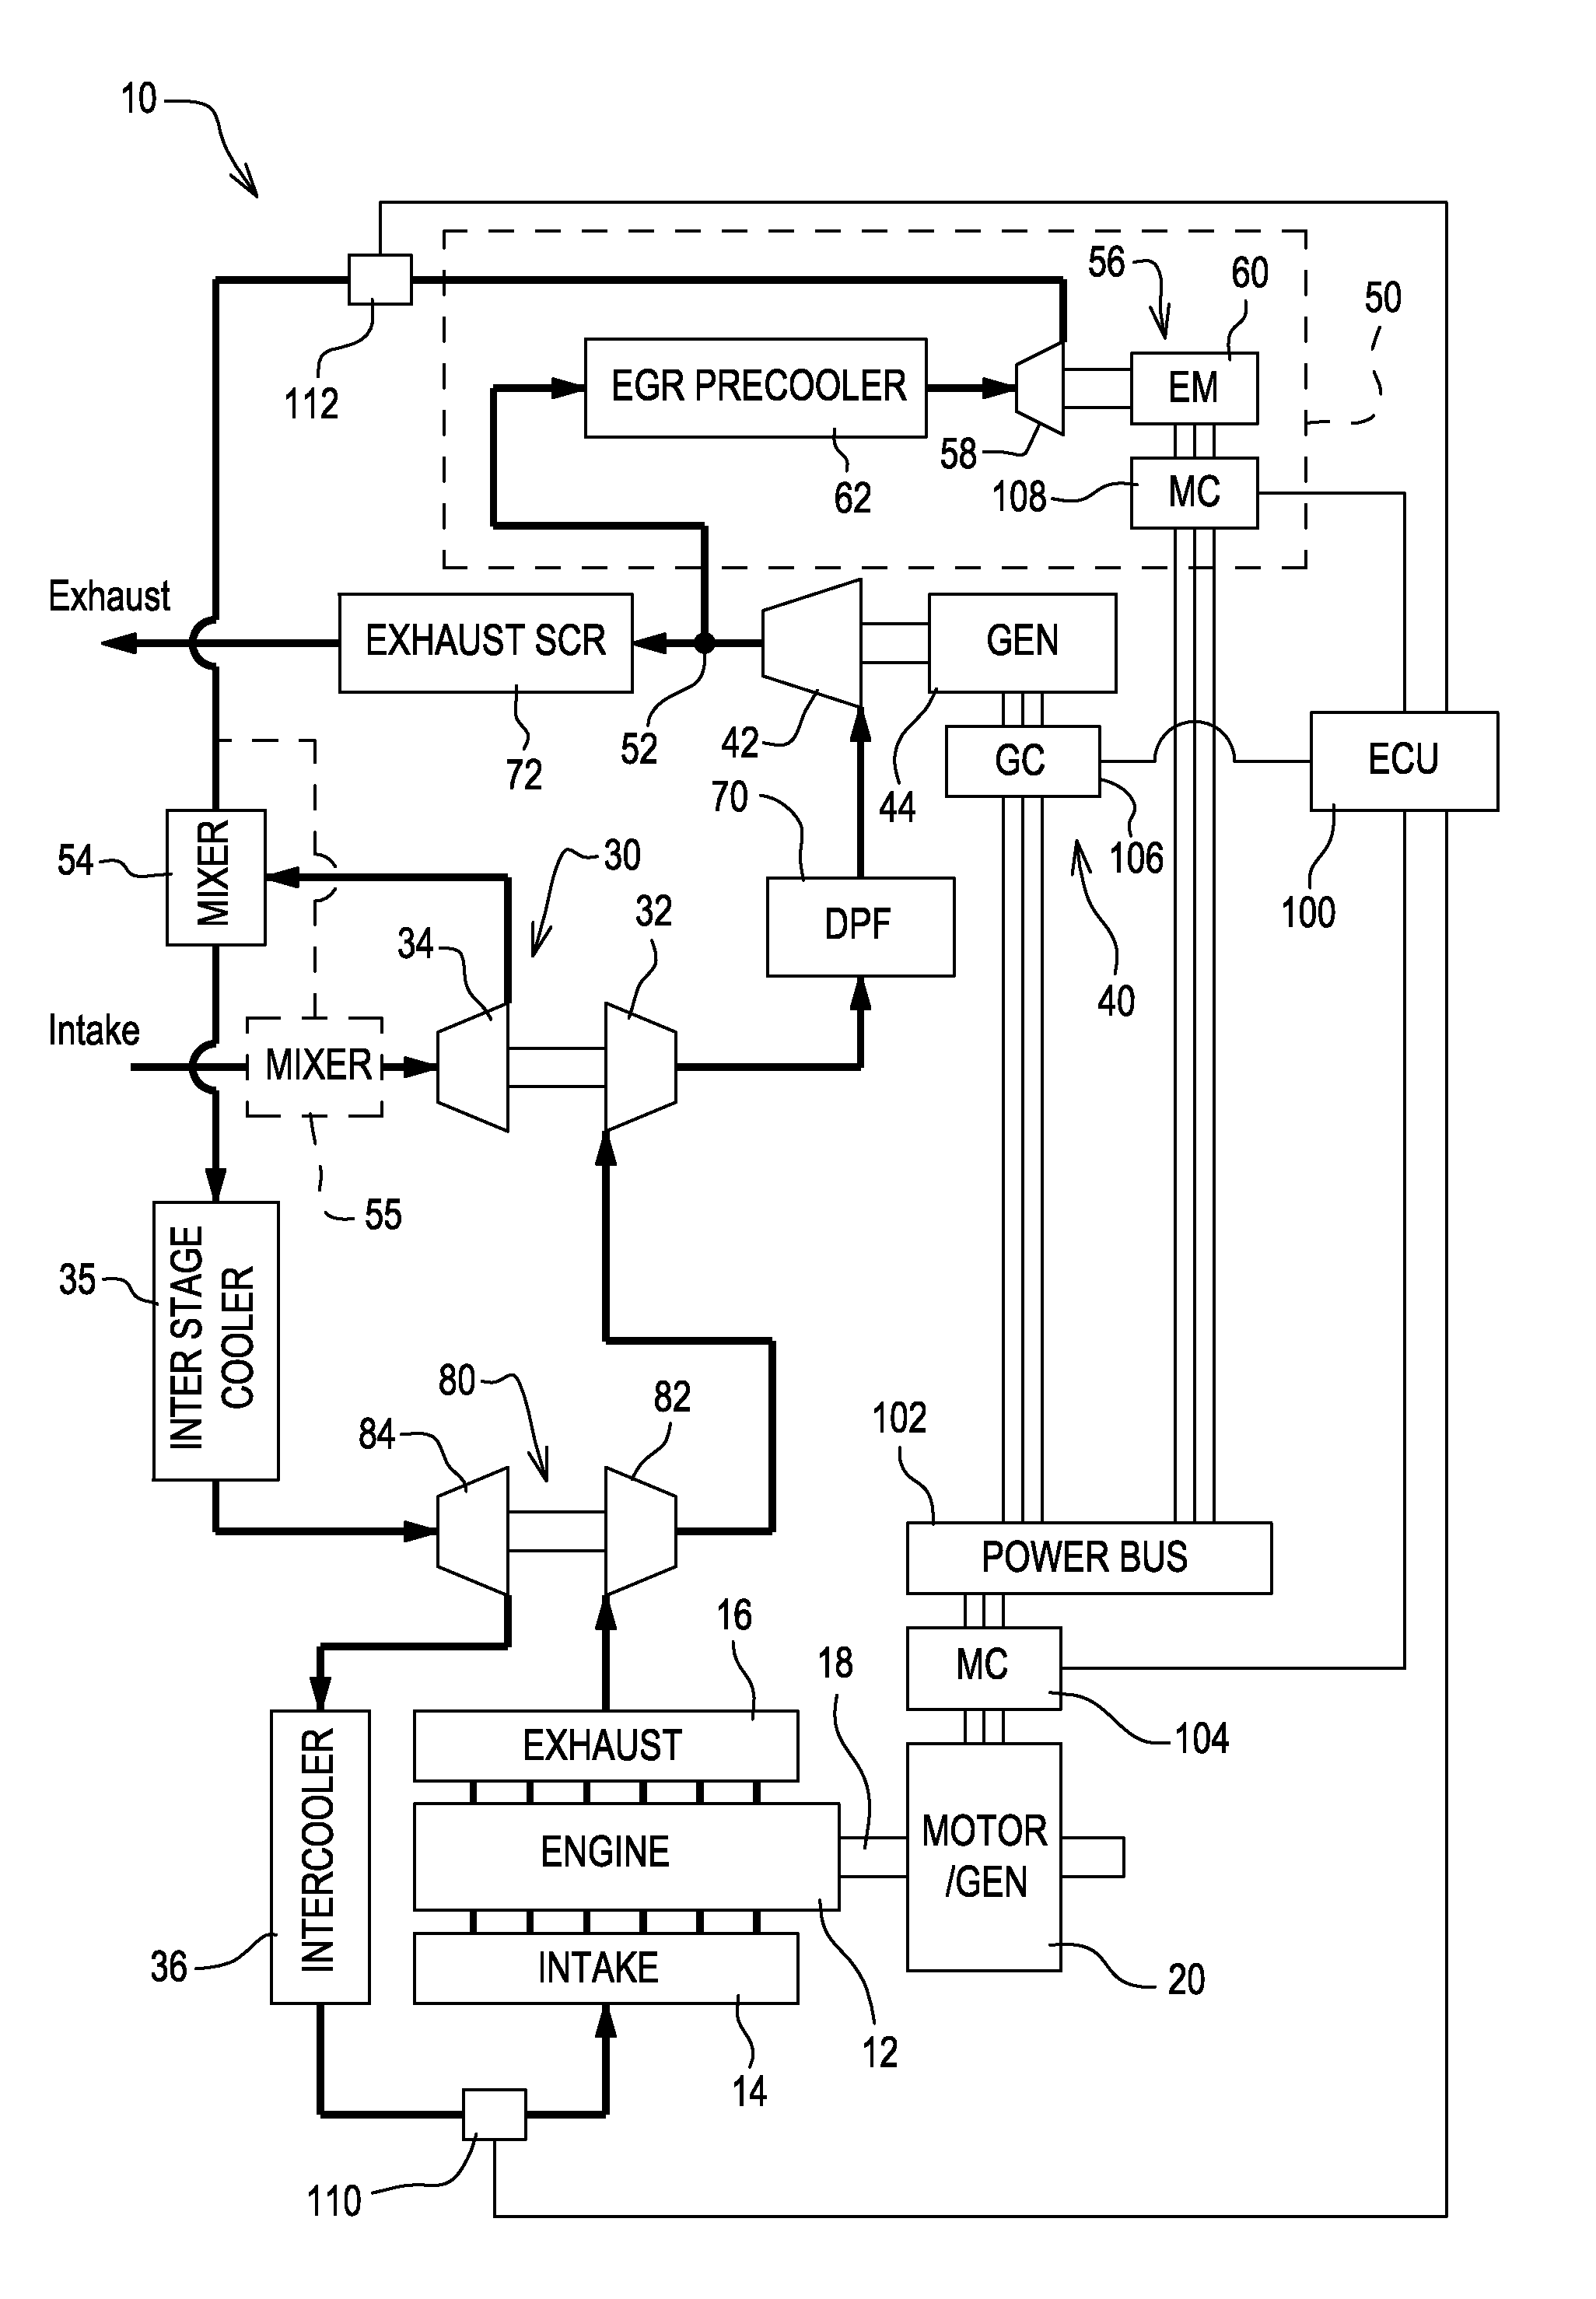 Metering exhaust gas recirculation system for a dual turbocharged engine having a turbogenerator system